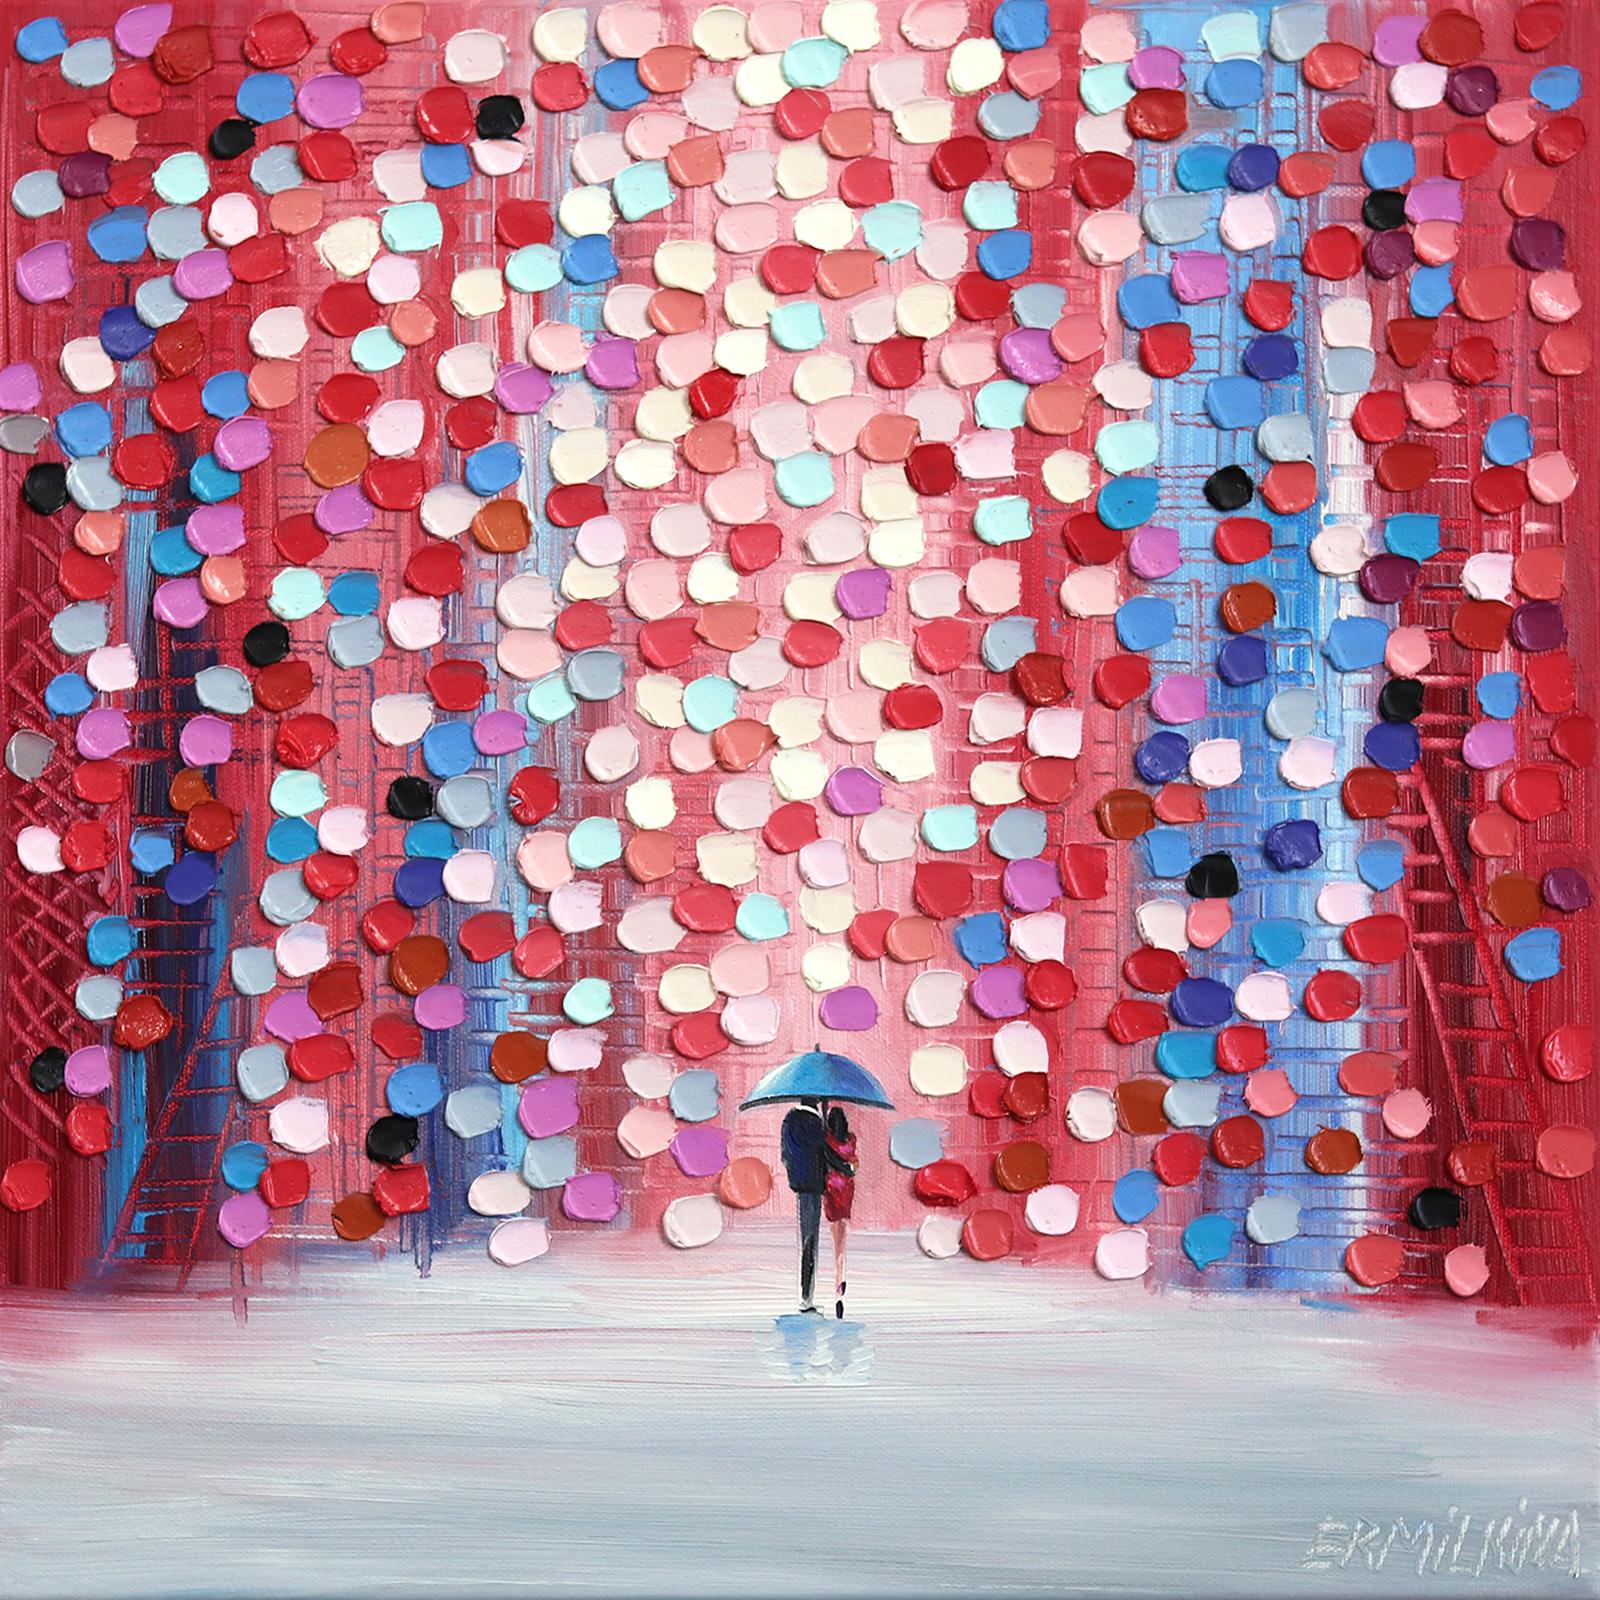 Ekaterina Ermilkina Abstract Painting - Pink Lullaby - Original Oil Painting Abstract City with Couple and Umbrella